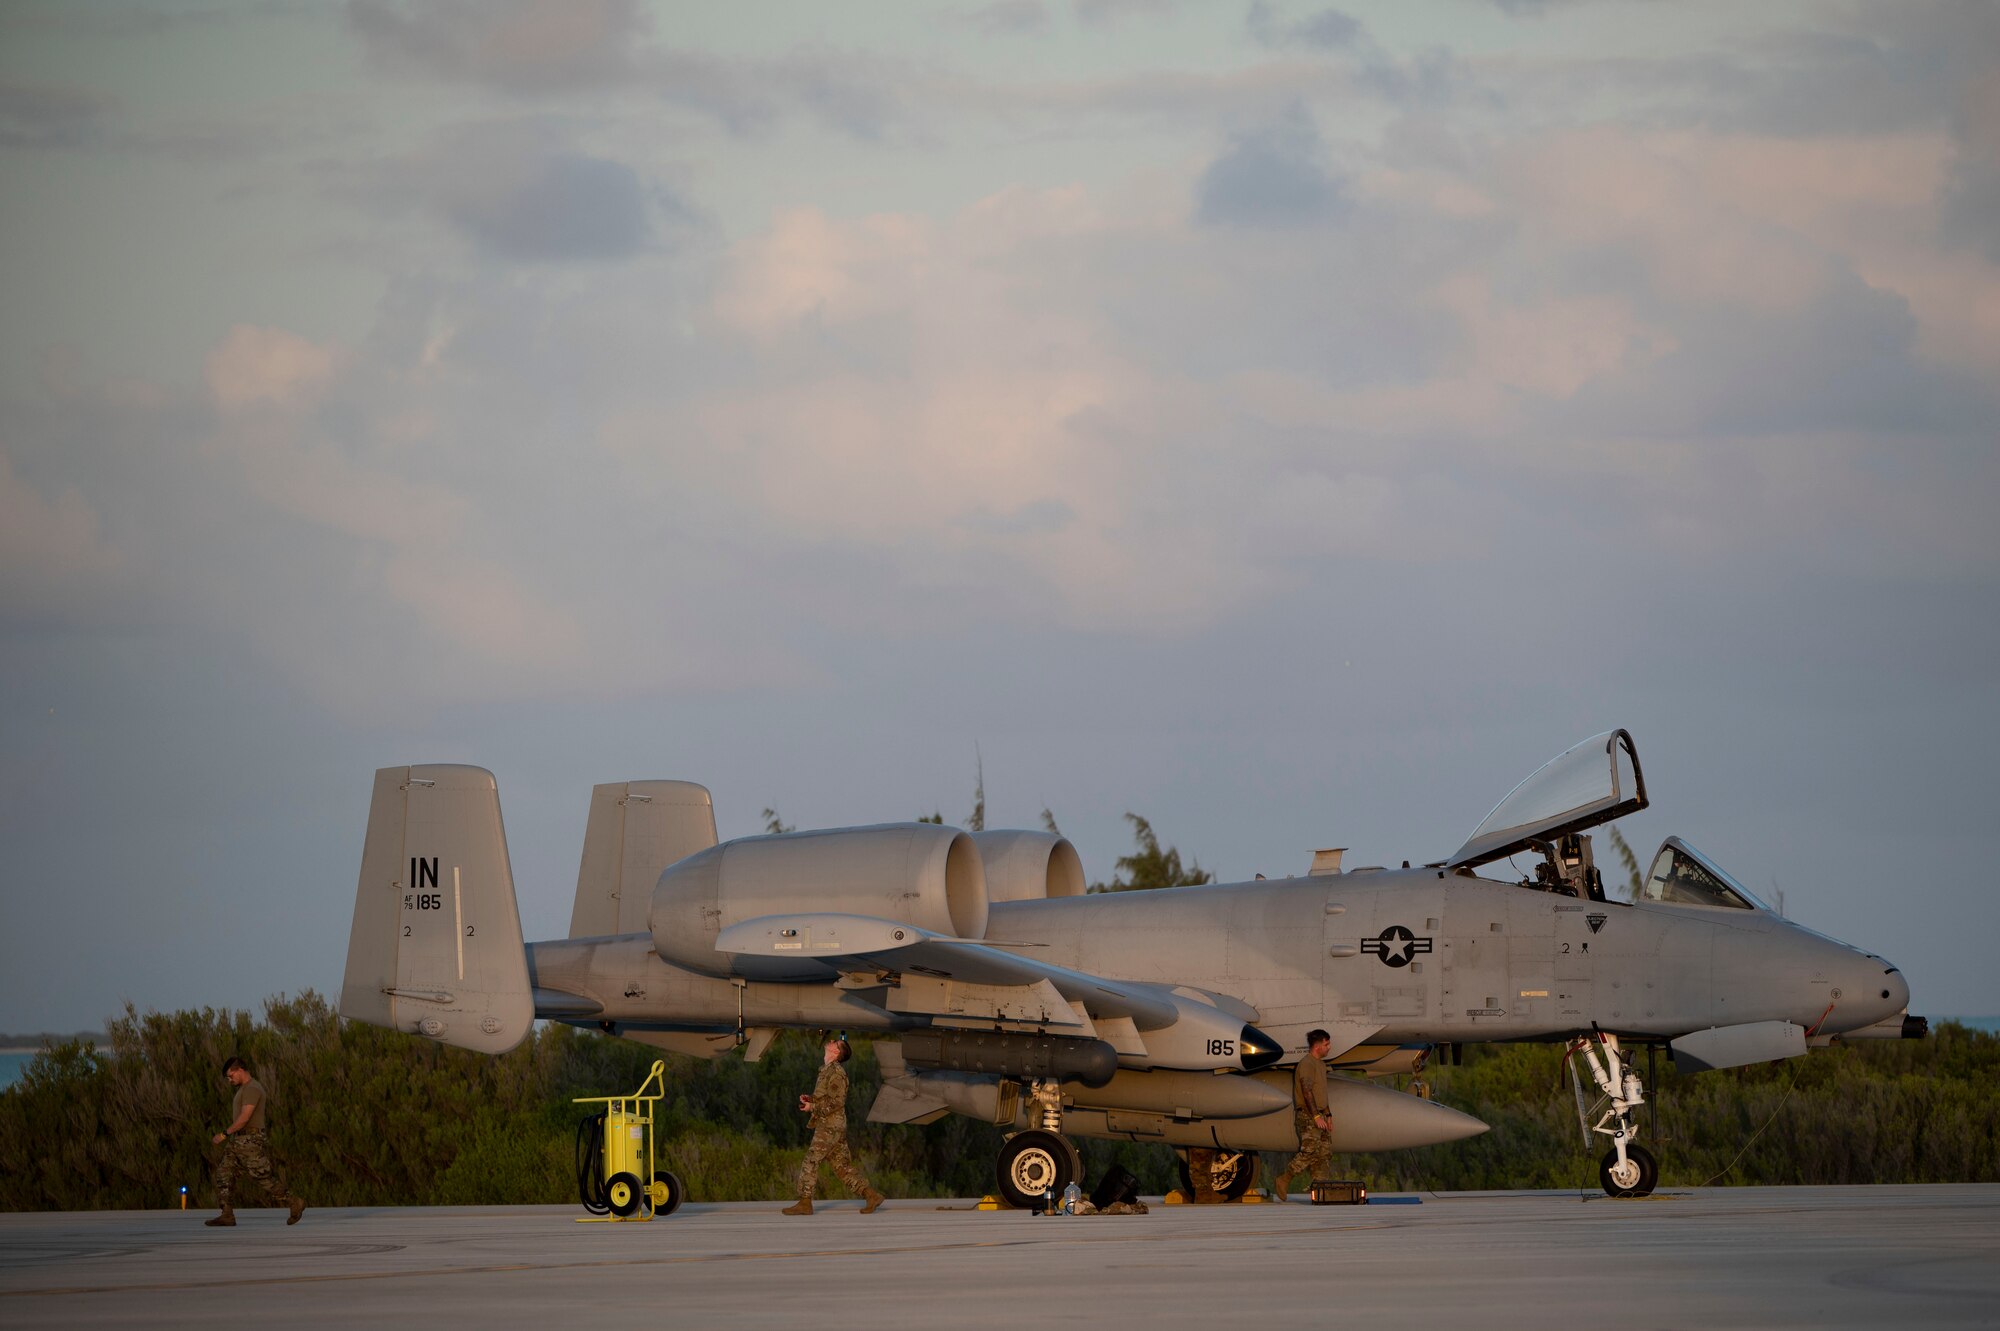 AATC A-10 maintenance personnel prepare the aircraft for the return flight from Wake Island Airfield to Joint Base Pearl Harbor-Hickam, Hawaii. The A-10s were an integral part of Exercise KANI WILDCAT, a multi-faceted ACE exercise that allowed for several testing events and integration with Air Force Special Warfare operators, A-10s, C-130s, F-22s, UH-1Ns, MV-22s and CH-53s.